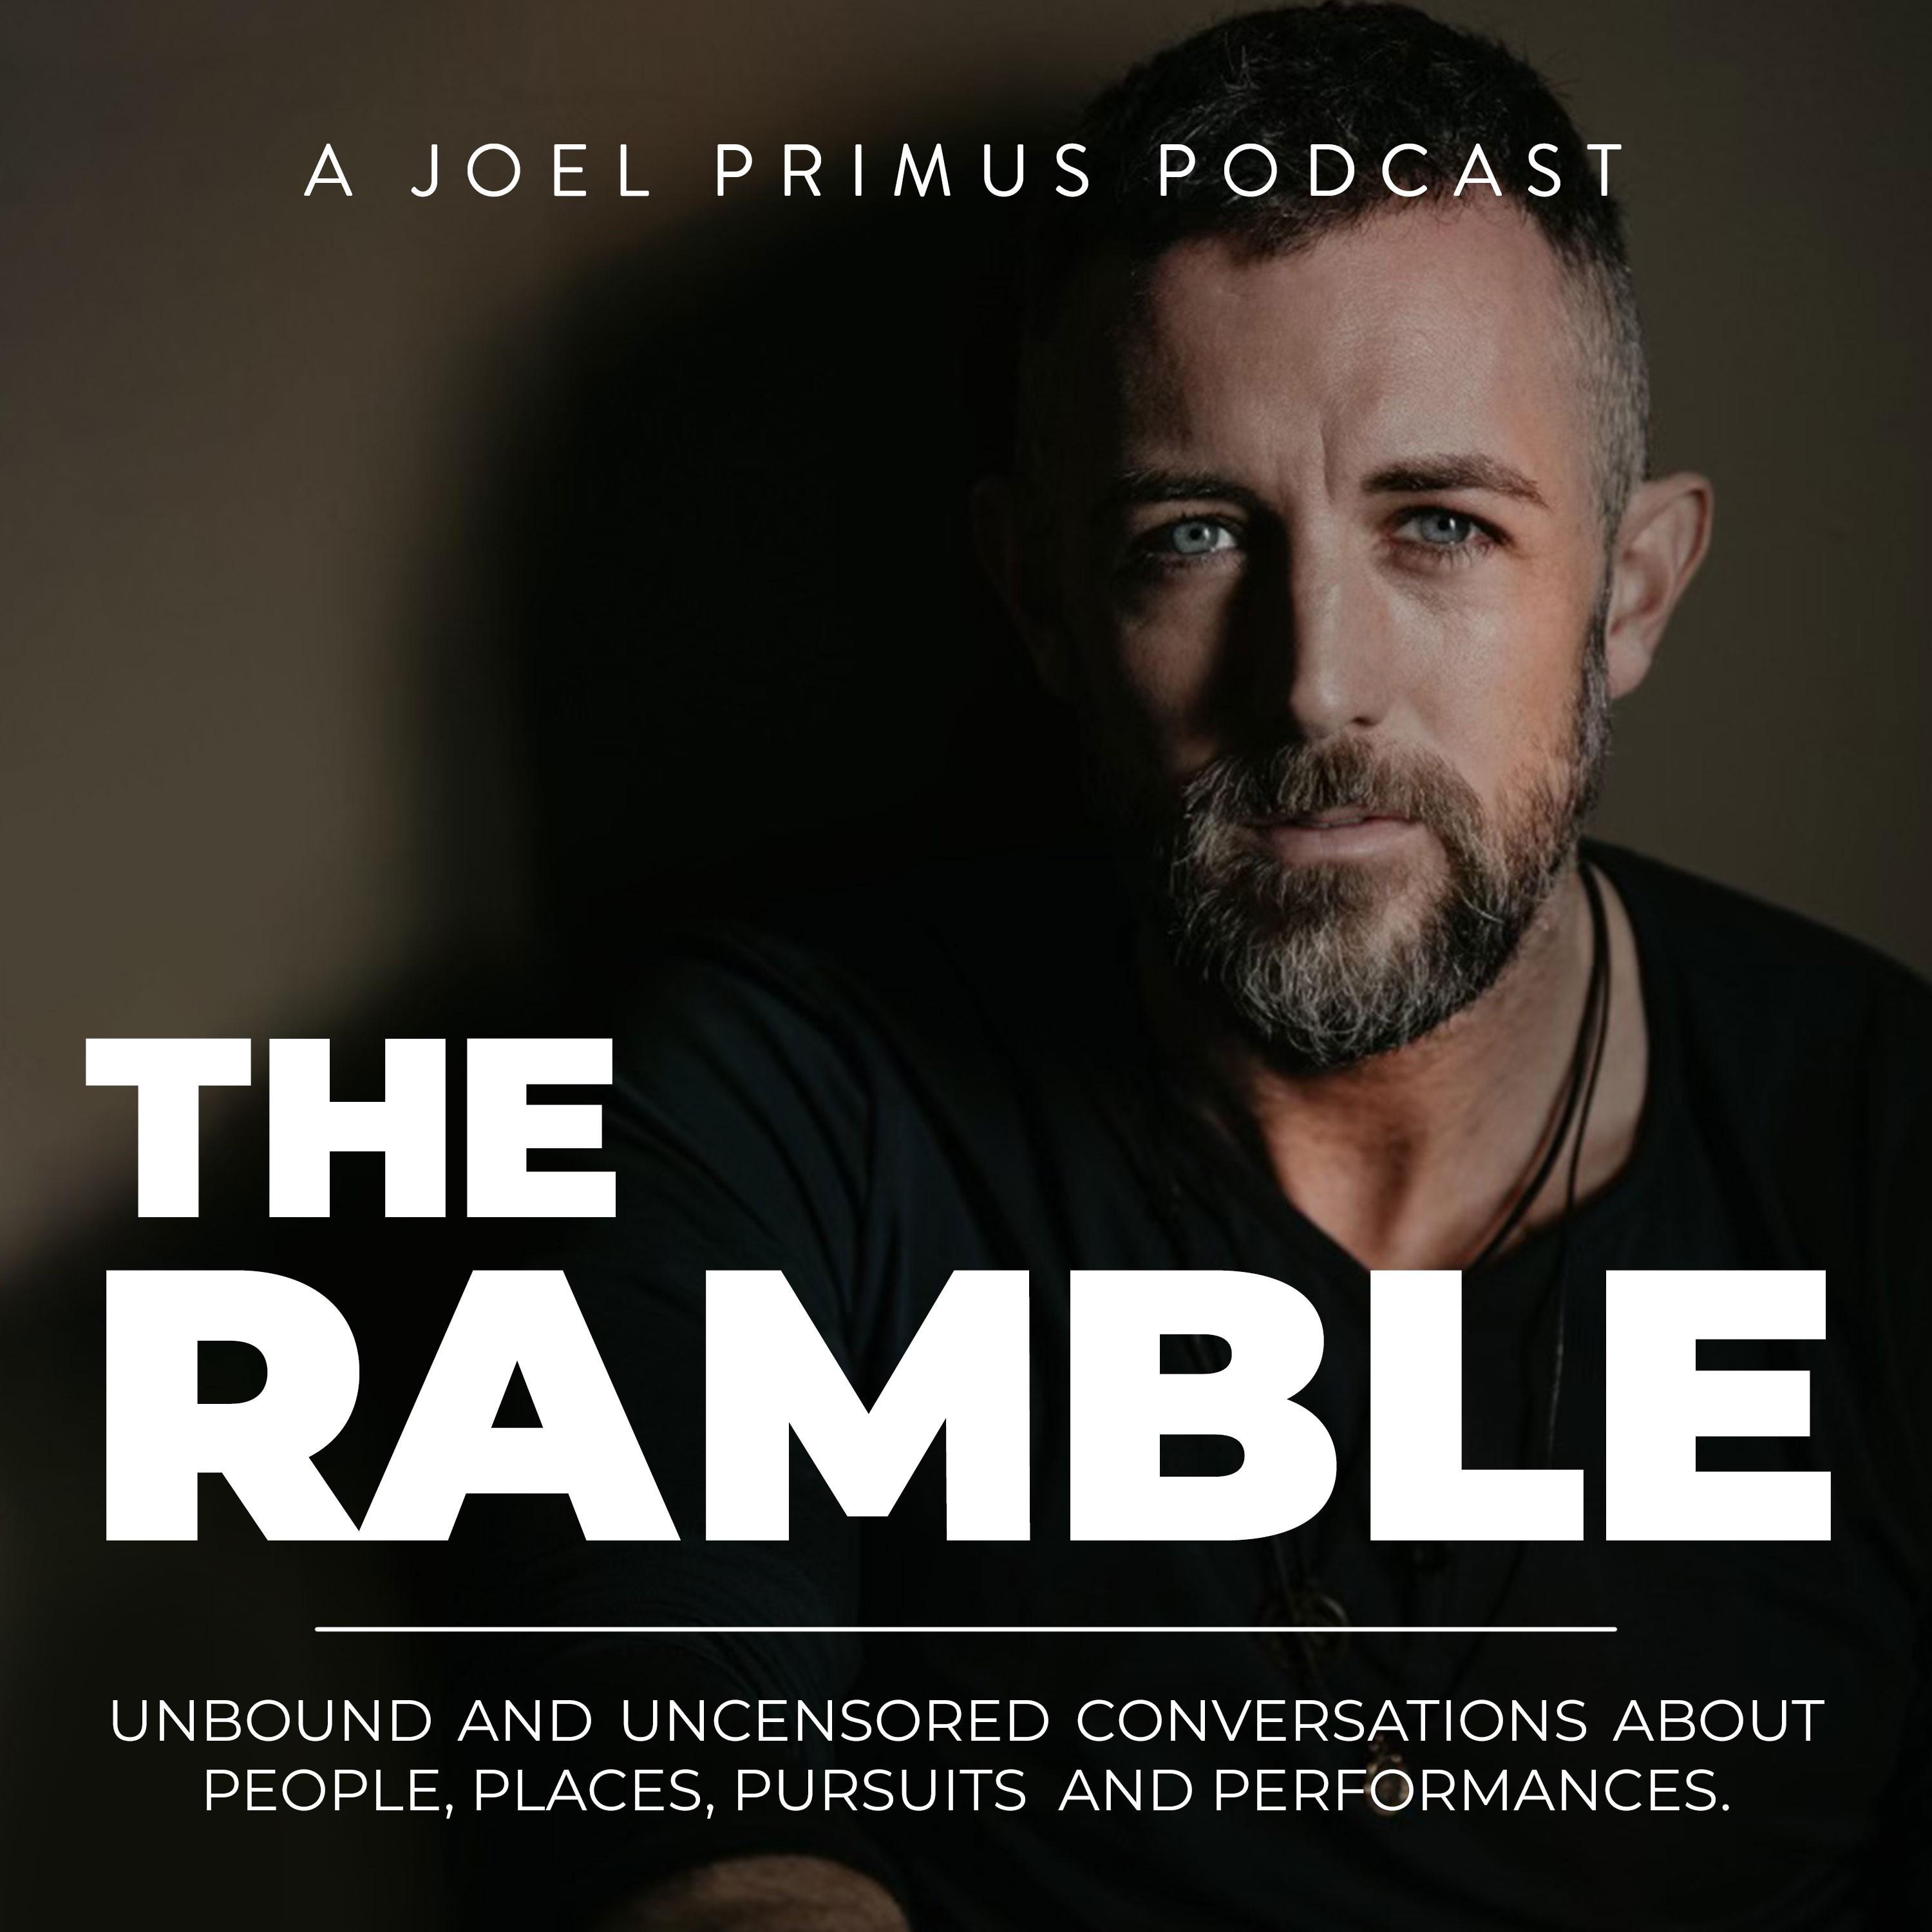 The Ramble: A Podcast From Joel Primus